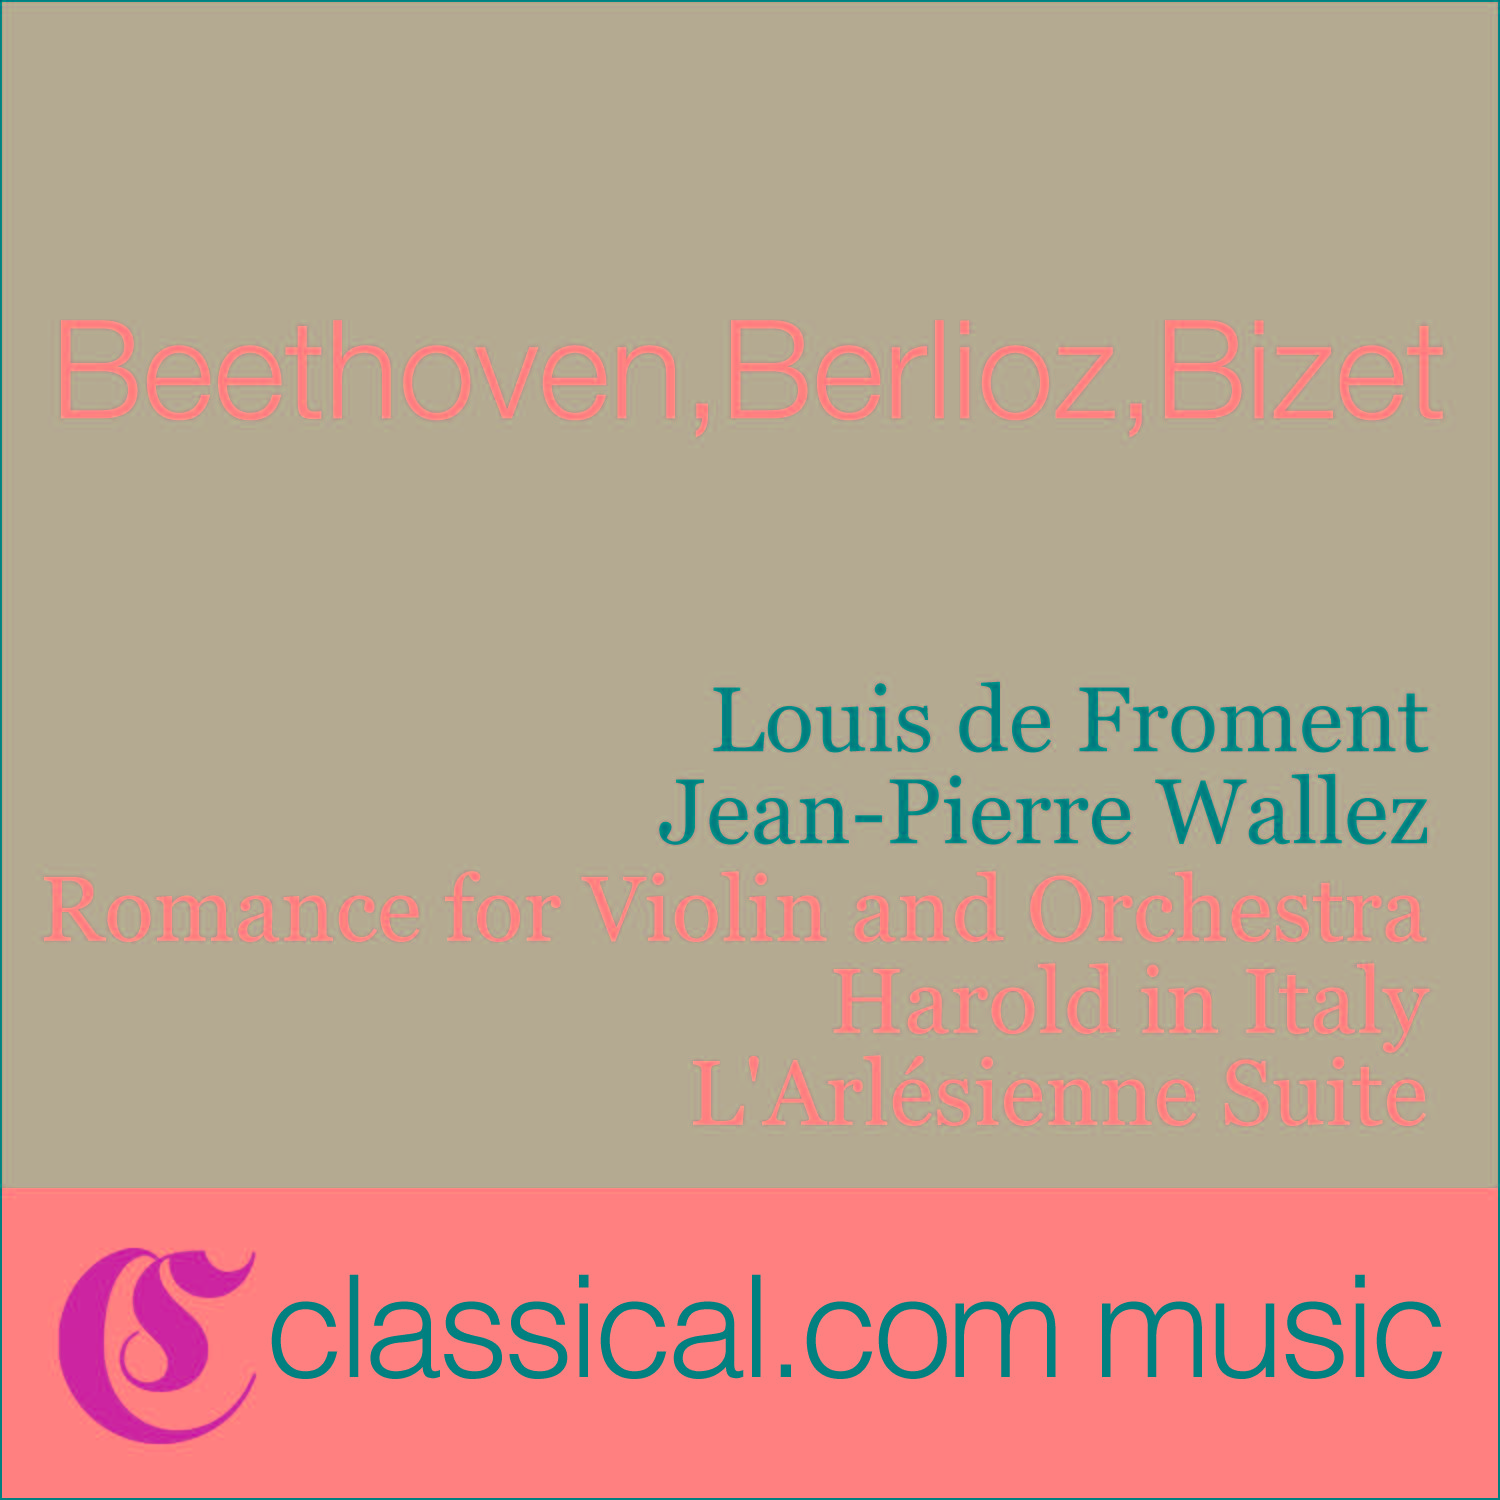 Romance for Violin and Orchestra No. 2 in F major, Op. 50 -